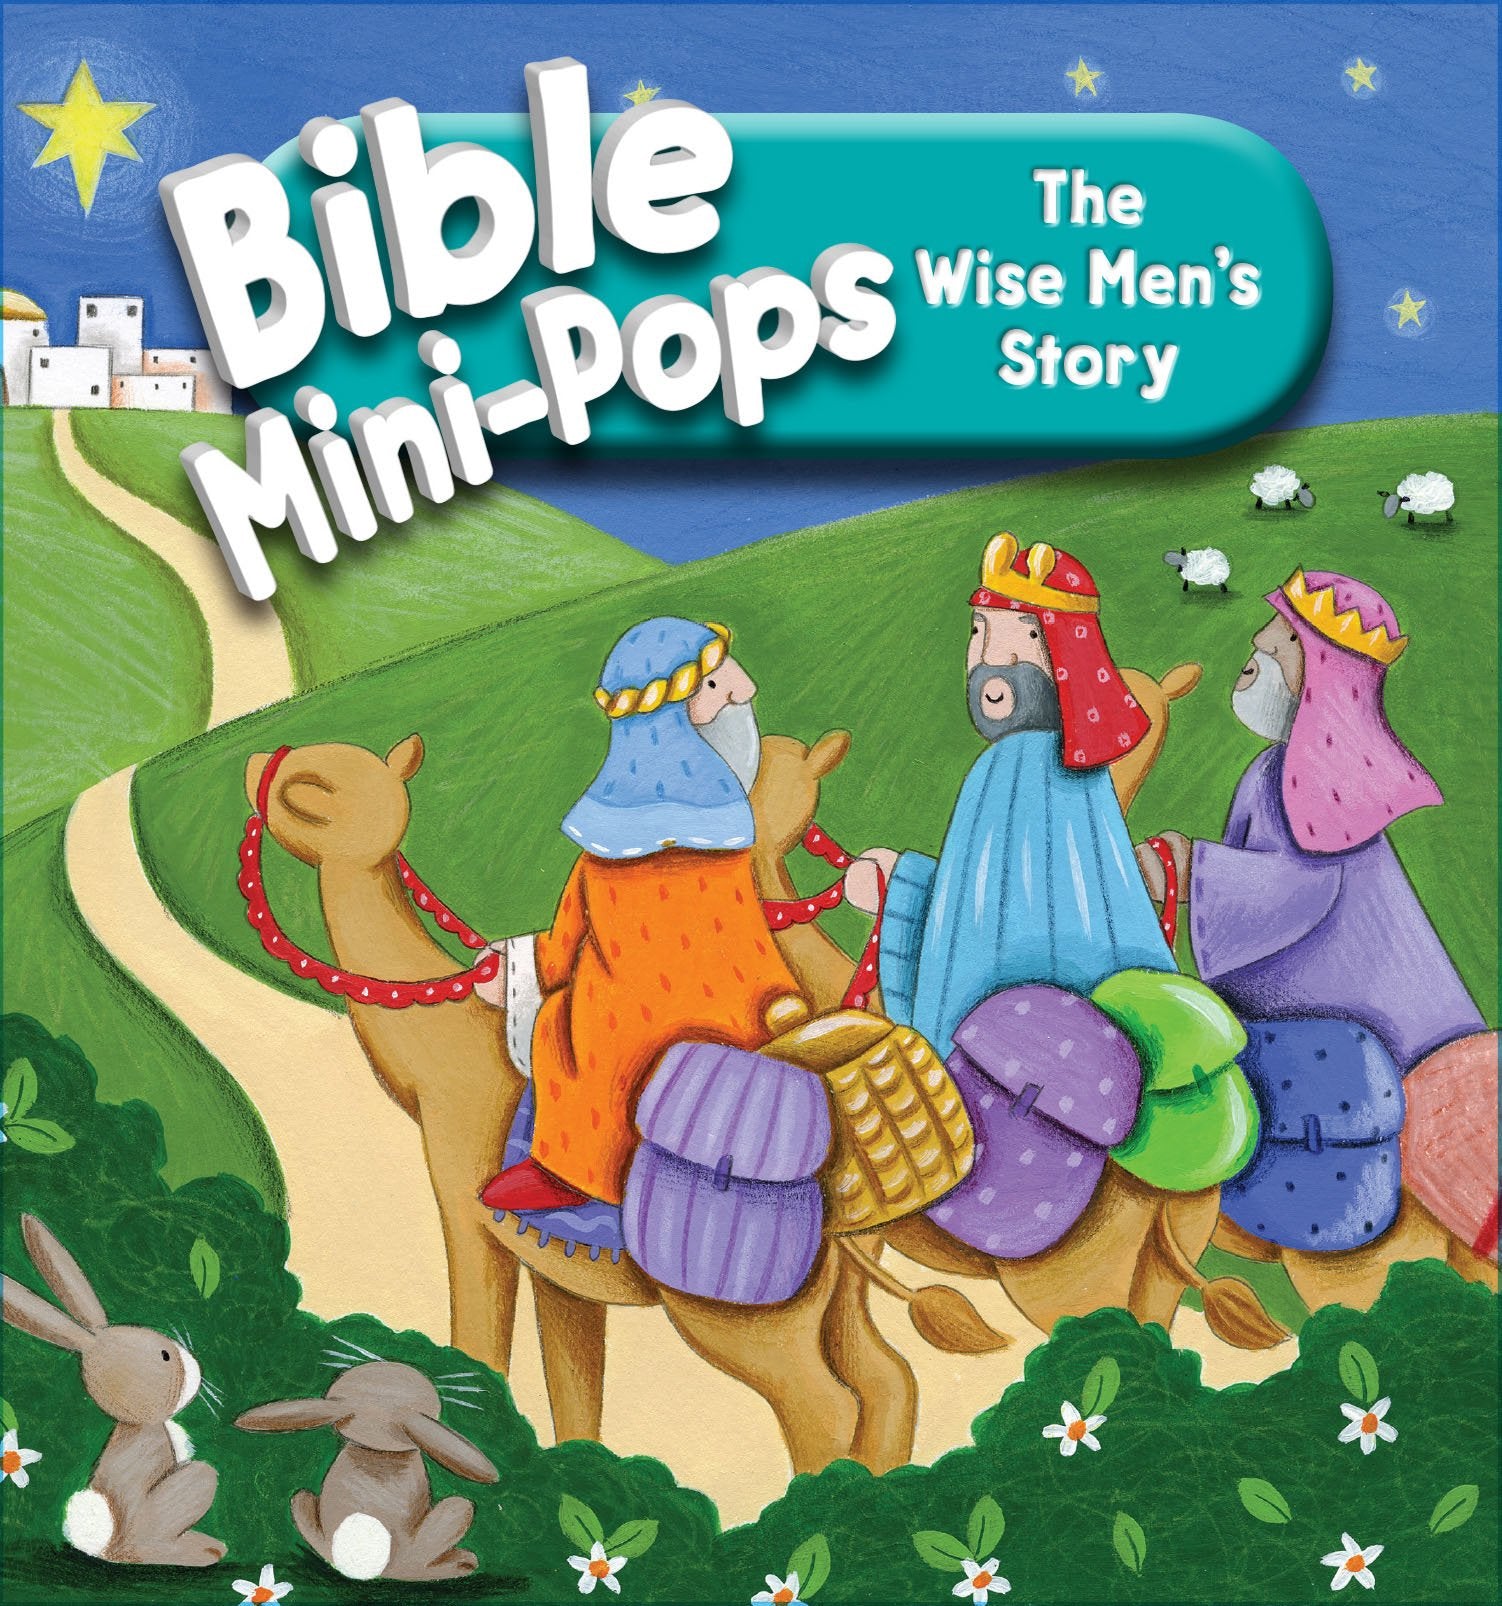 ROCKONLINE | New Creation Church | NCC | Joseph Prince | ROCK Bookshop | ROCK Bookstore | Star Vista | Children | Kids | Toddler | Preschooler | Bible Stories | Pop Up | Christian Living | Bible | The Wise Man's Story: Bible Mini-Pops | Free delivery for Singapore Orders above $50.